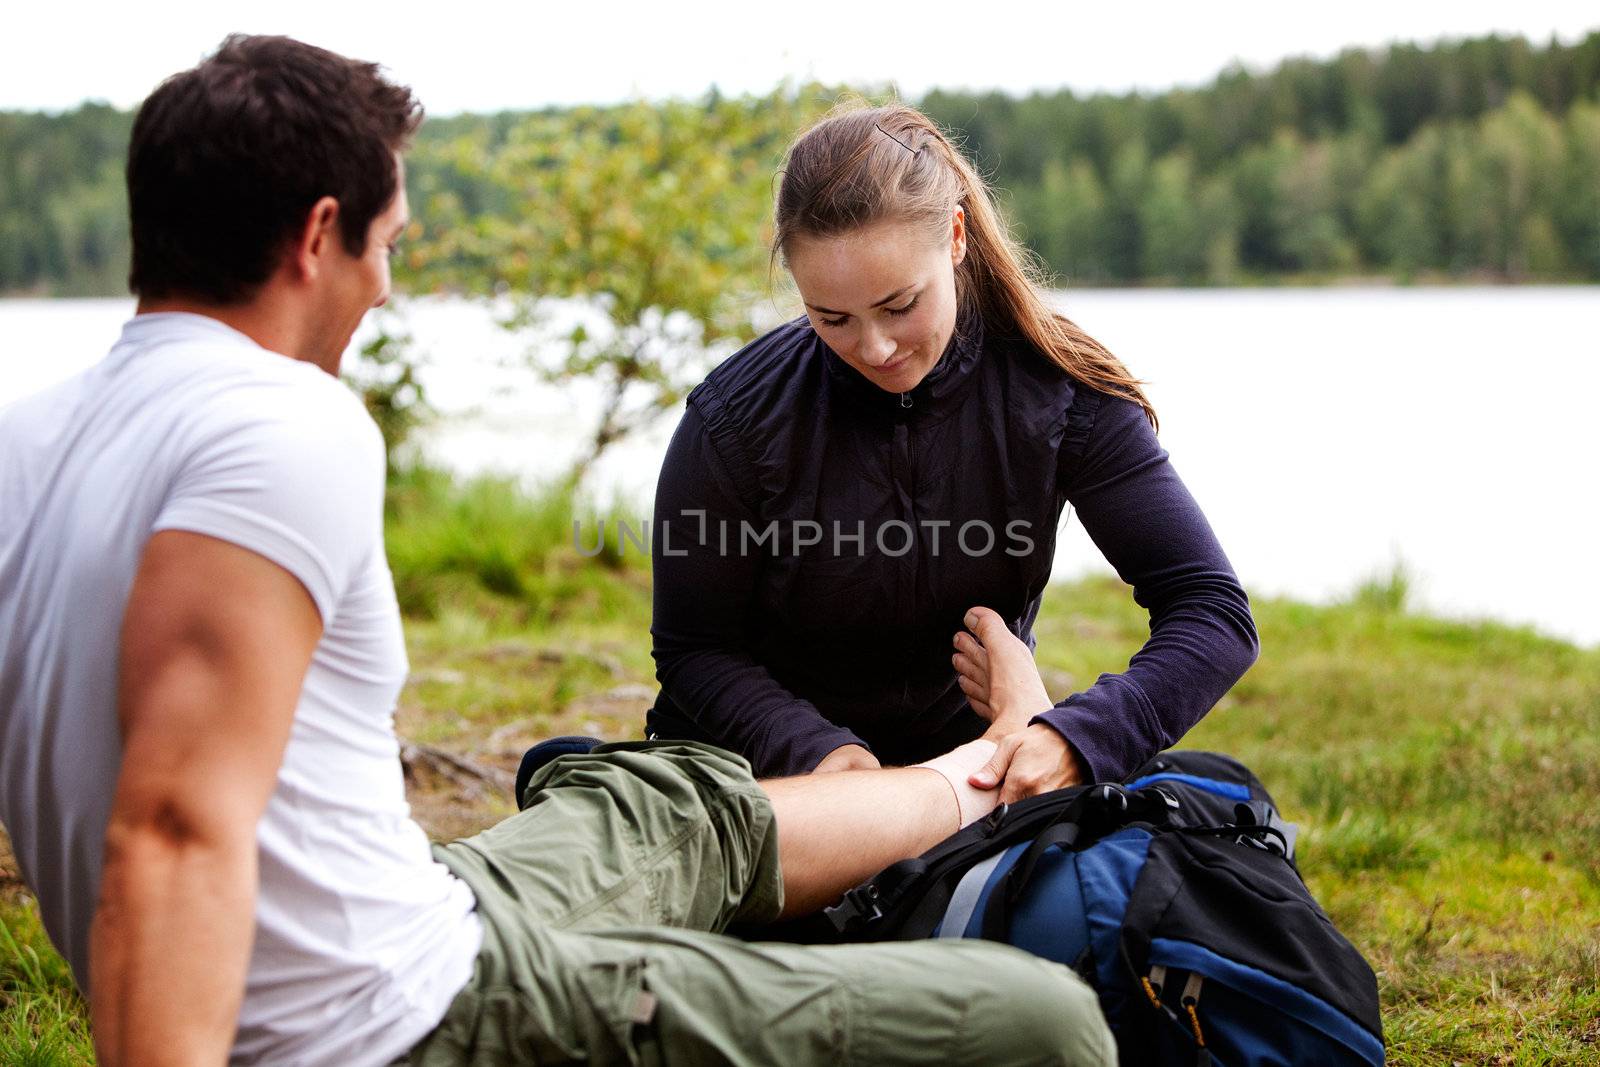 A woman applying an ankle bandage on a male camper